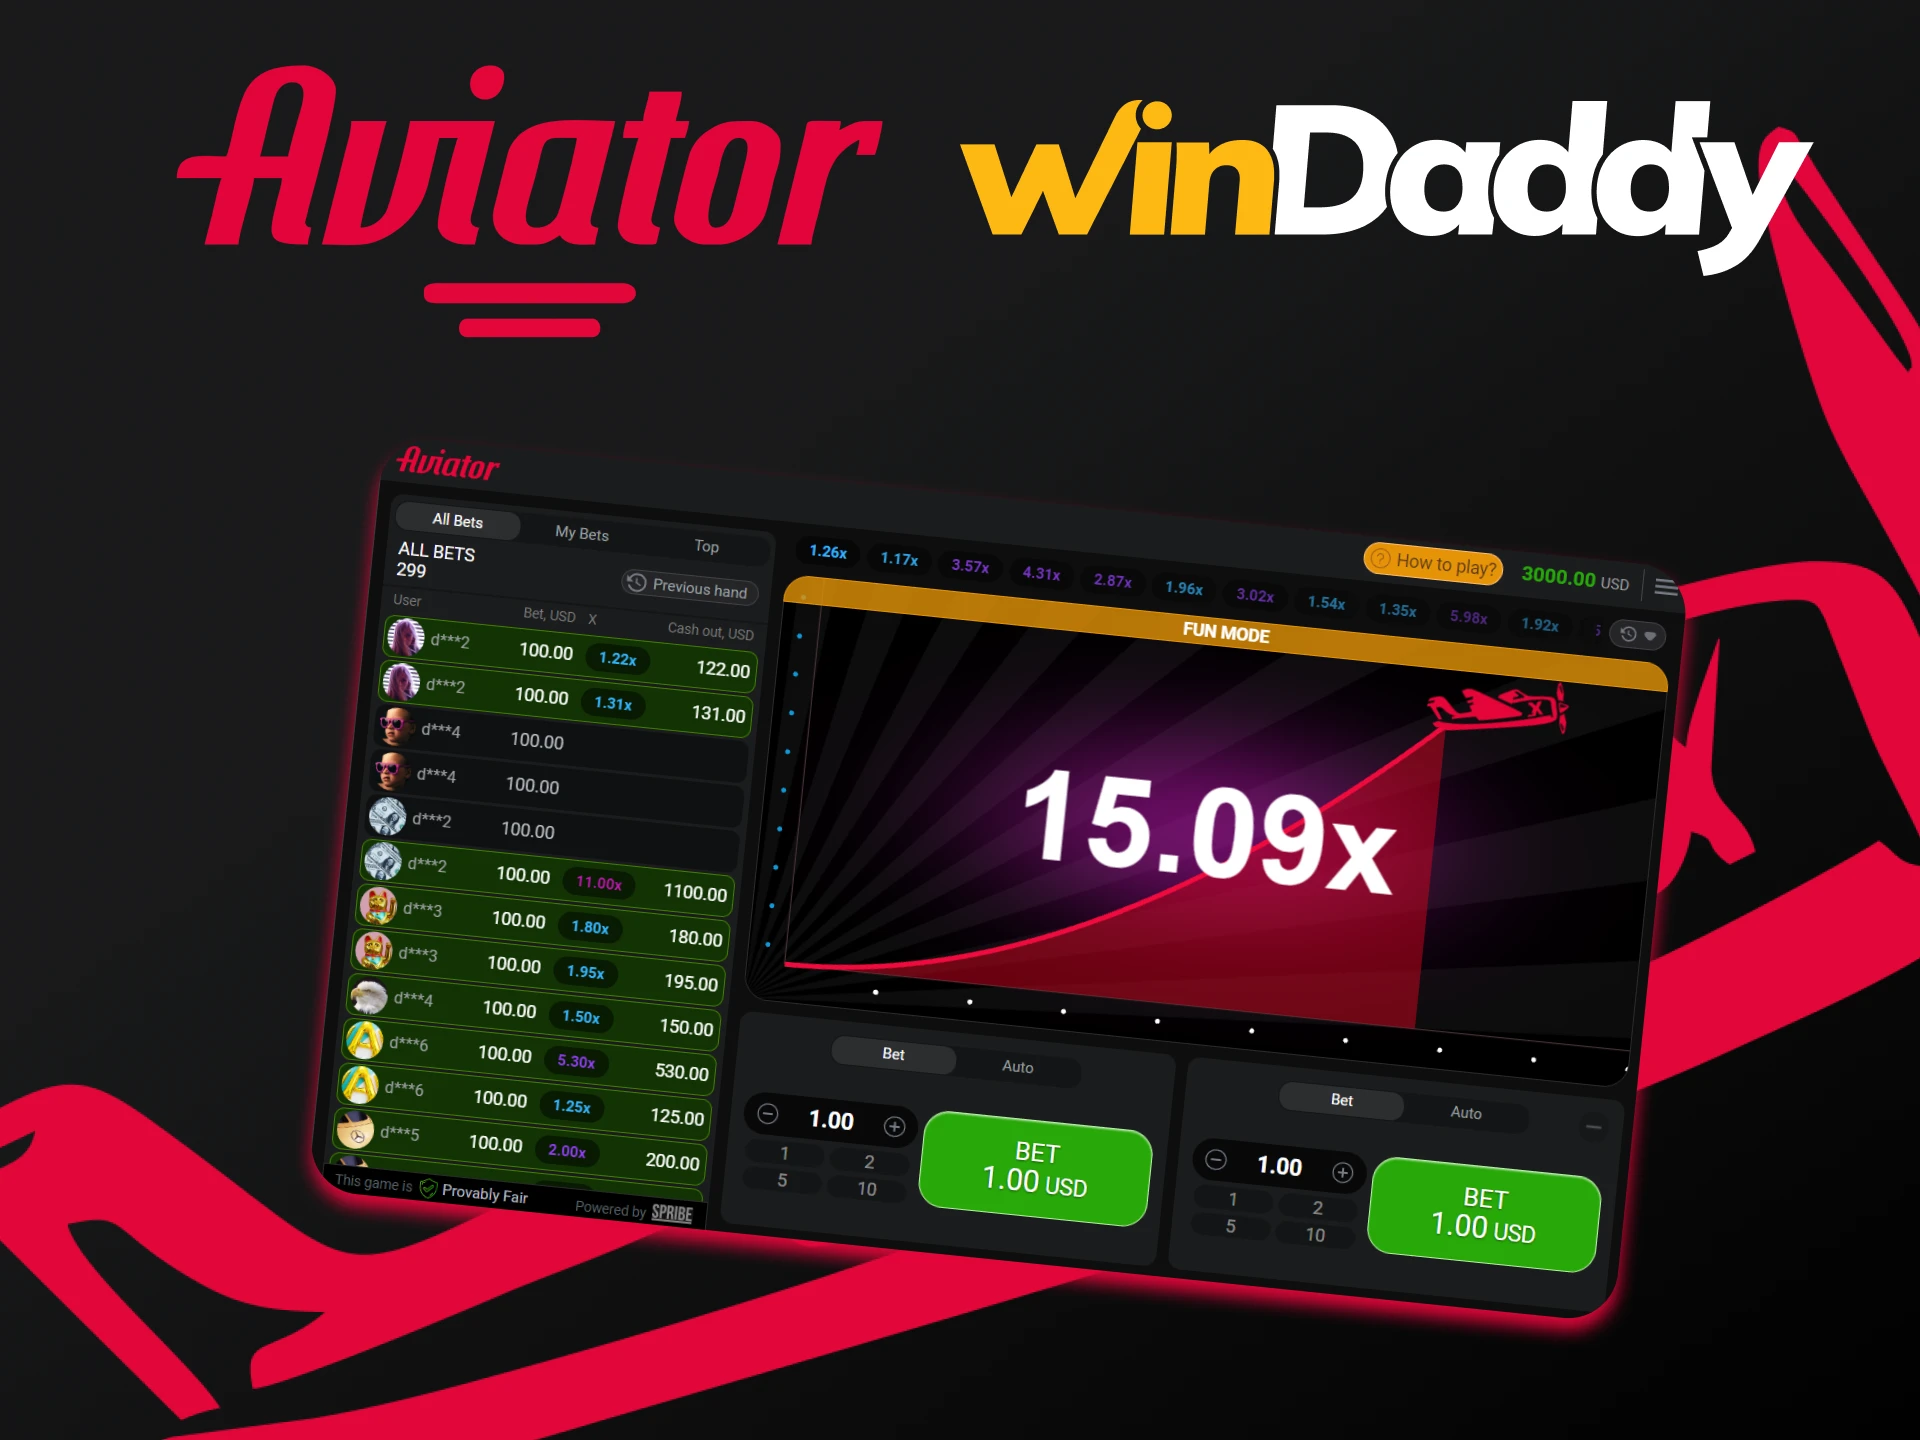 Find out what Aviator is on WinDaddy.